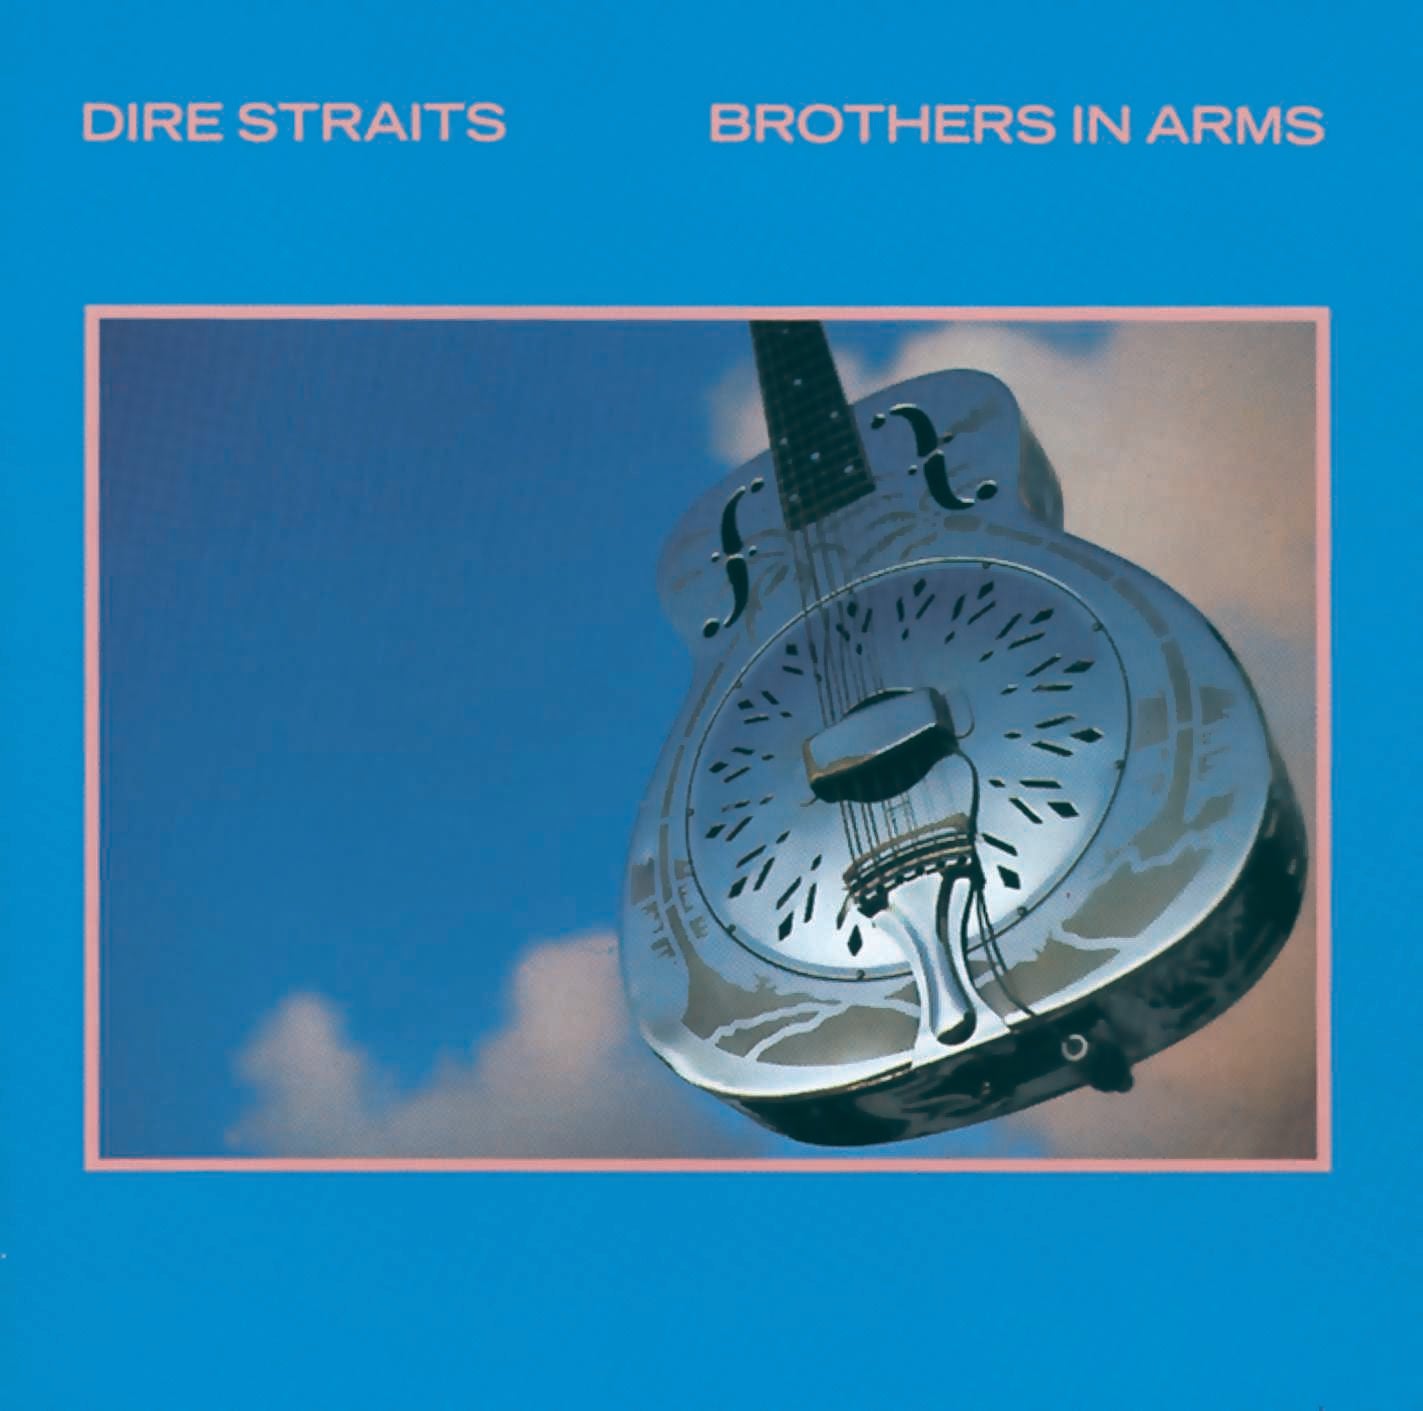 Brothers In Arms - Dire Straits 